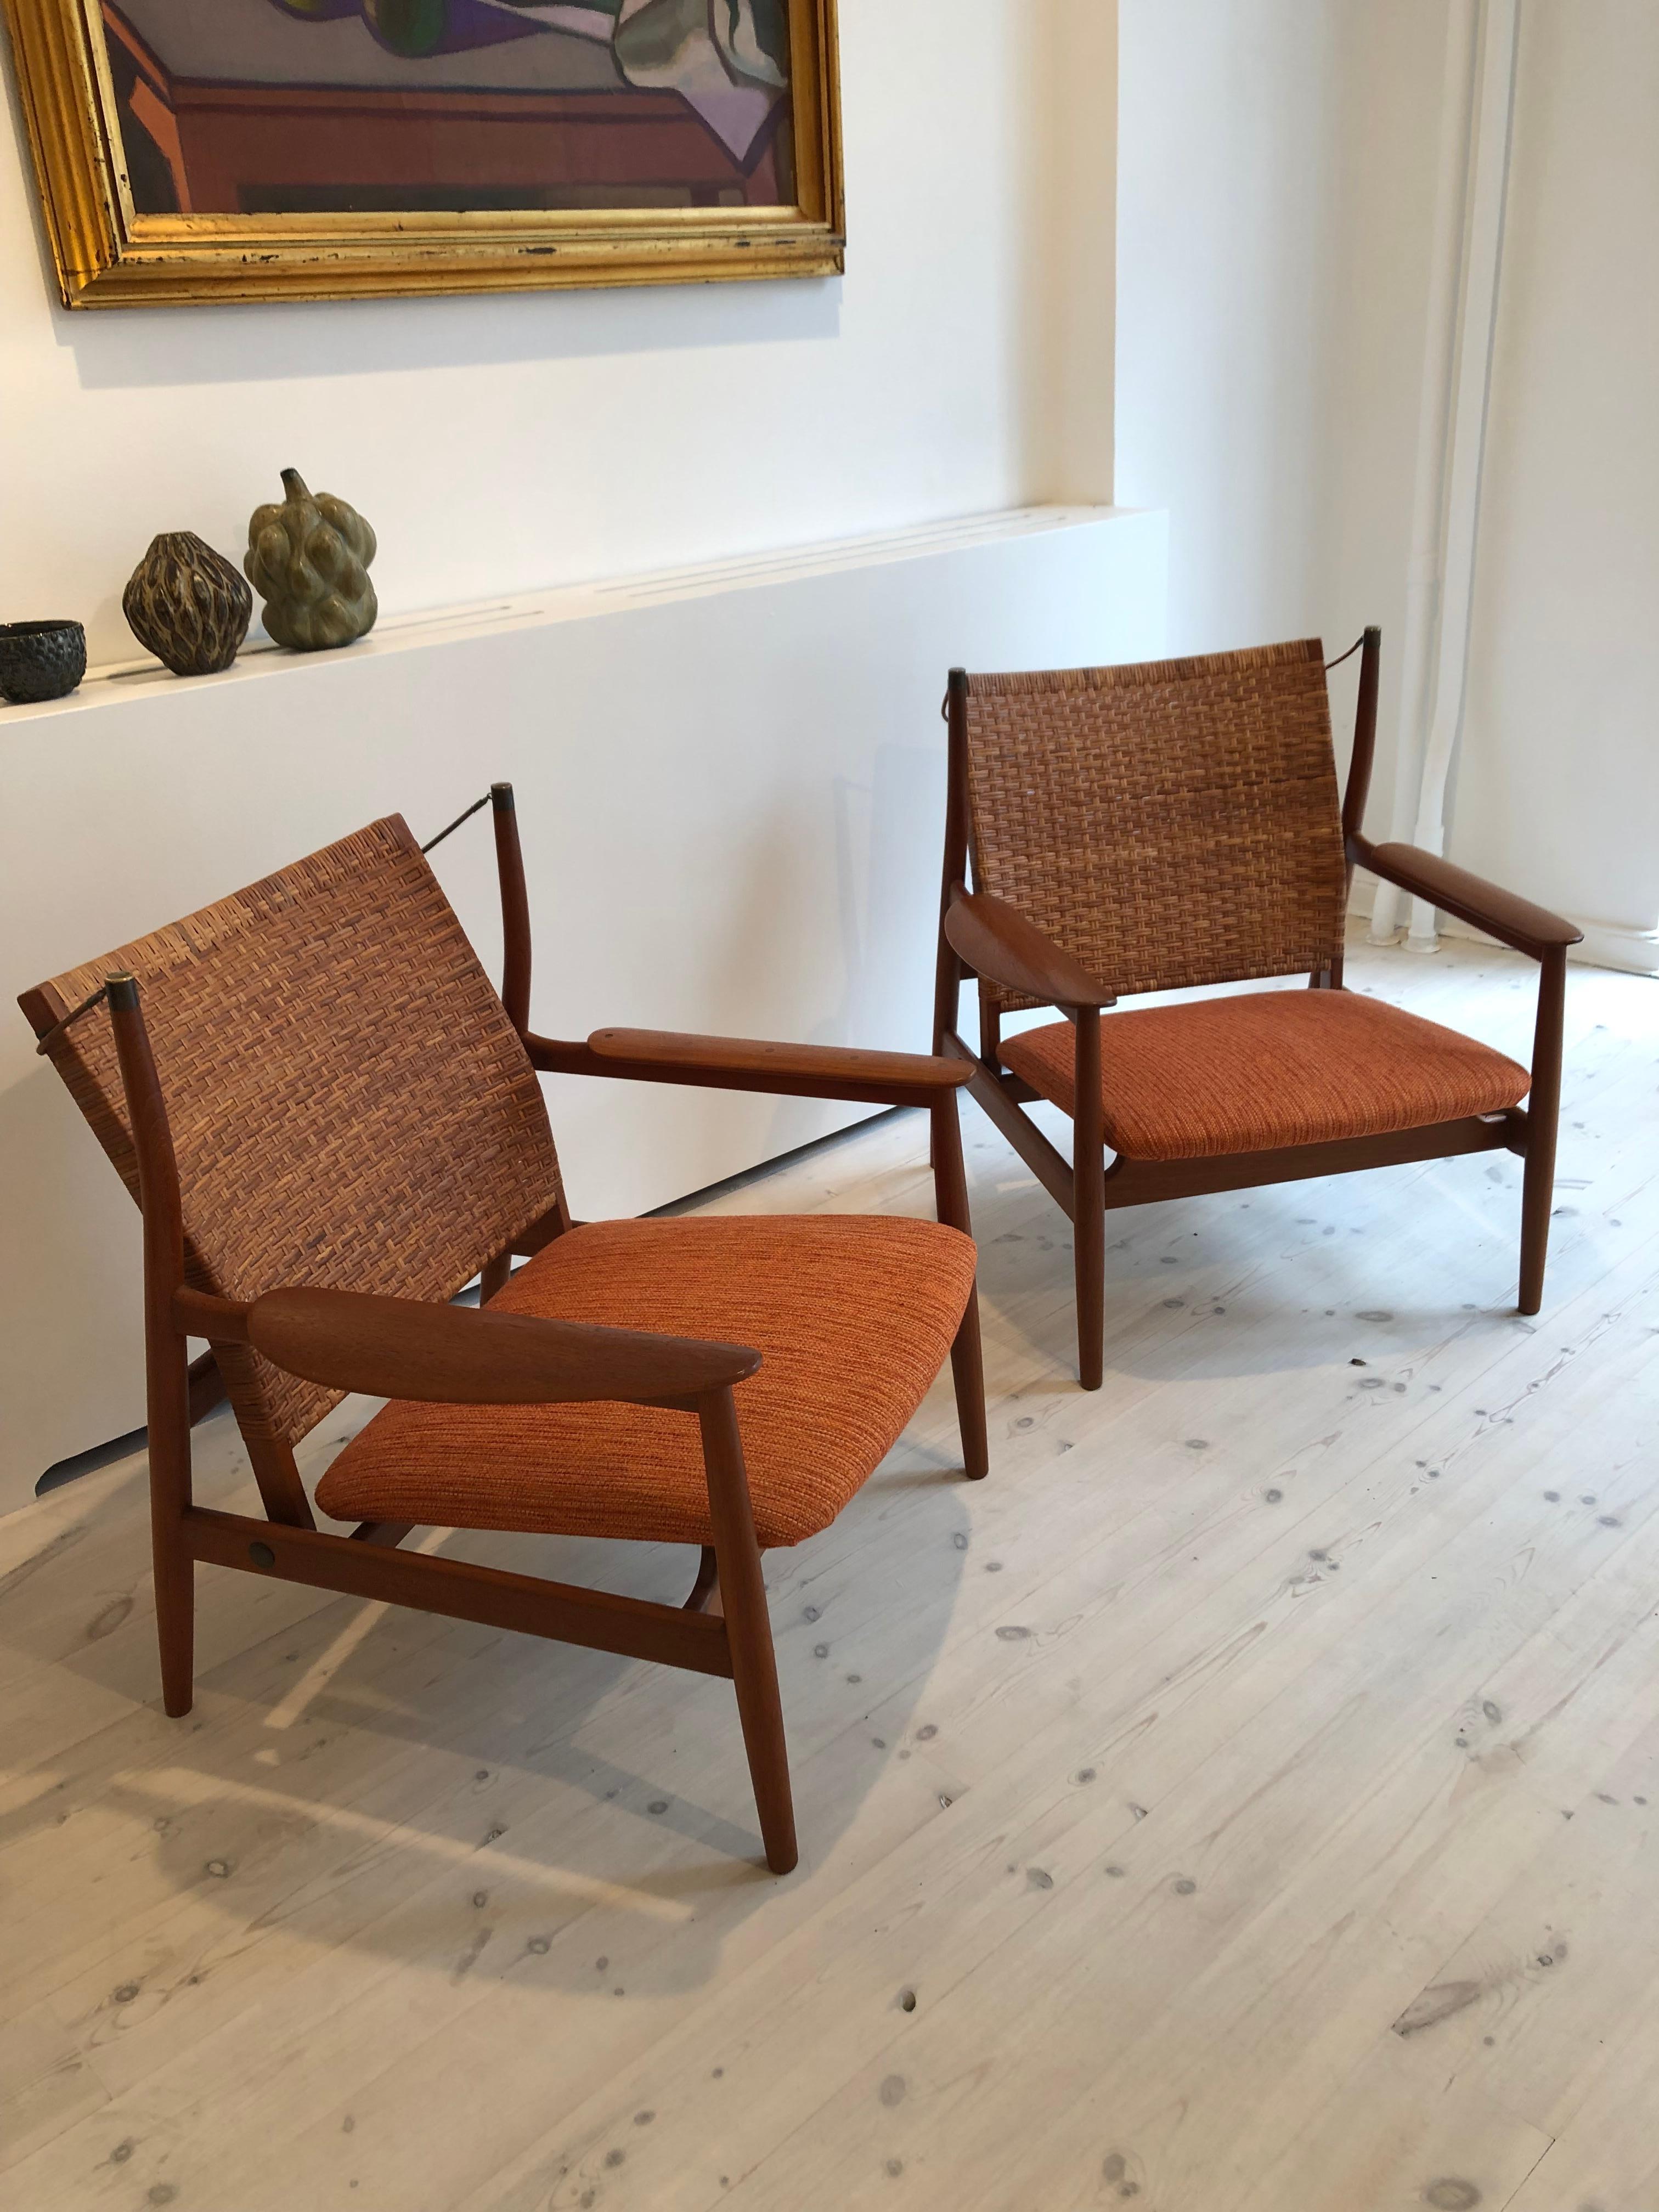 Finn Juhl, rare pair of teak NV55 armchairs for master cabinetmaker Niels Vodder with adjustable backs in cane. Seats in fabric. Each chair branded manufacturer’s mark to underside: 'Cabinetmaker Niels Vodder, Copenhagen Denmark, Design Finn Juhl'.